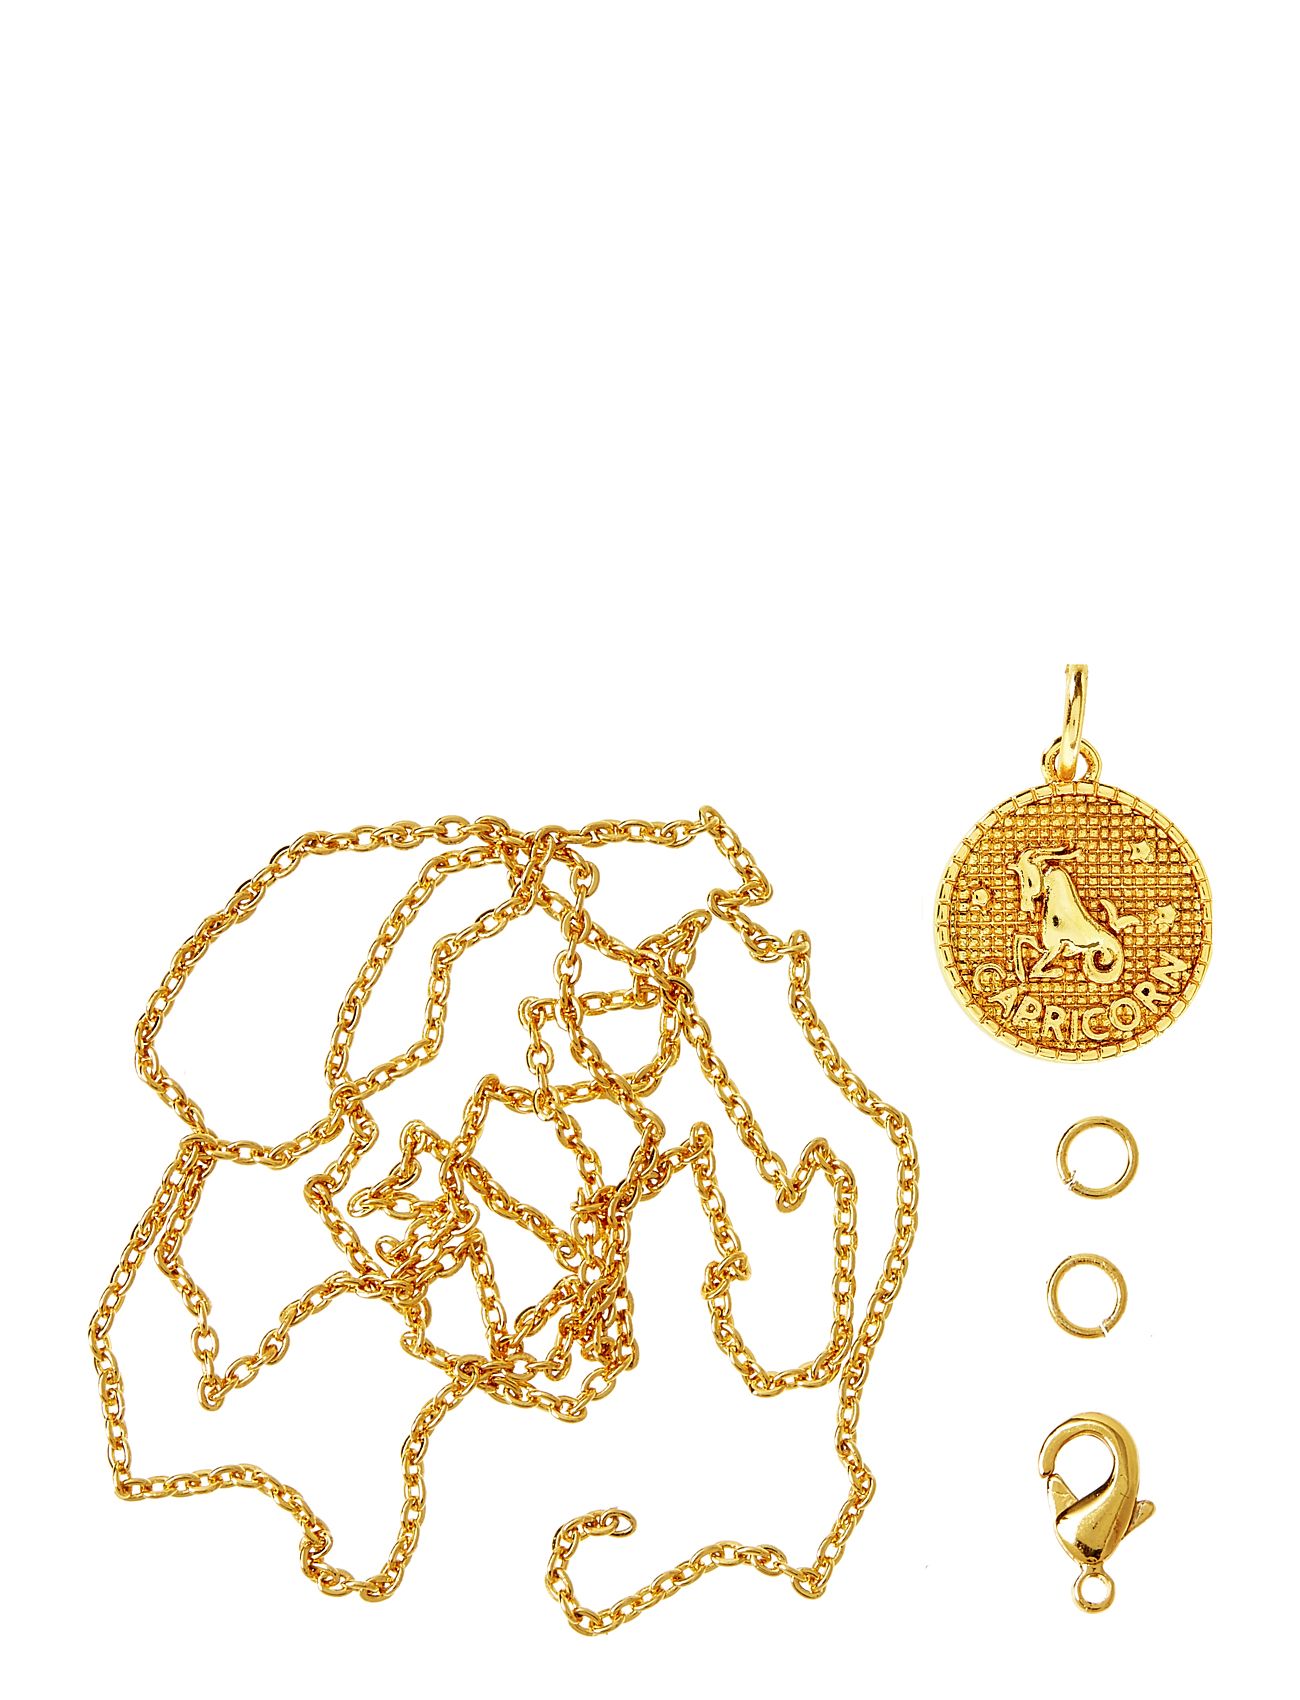 Zodiac Coin Pendant And Chain Set, Capricorn Toys Creativity Drawing & Crafts Craft Jewellery & Accessories Gold Me & My Box